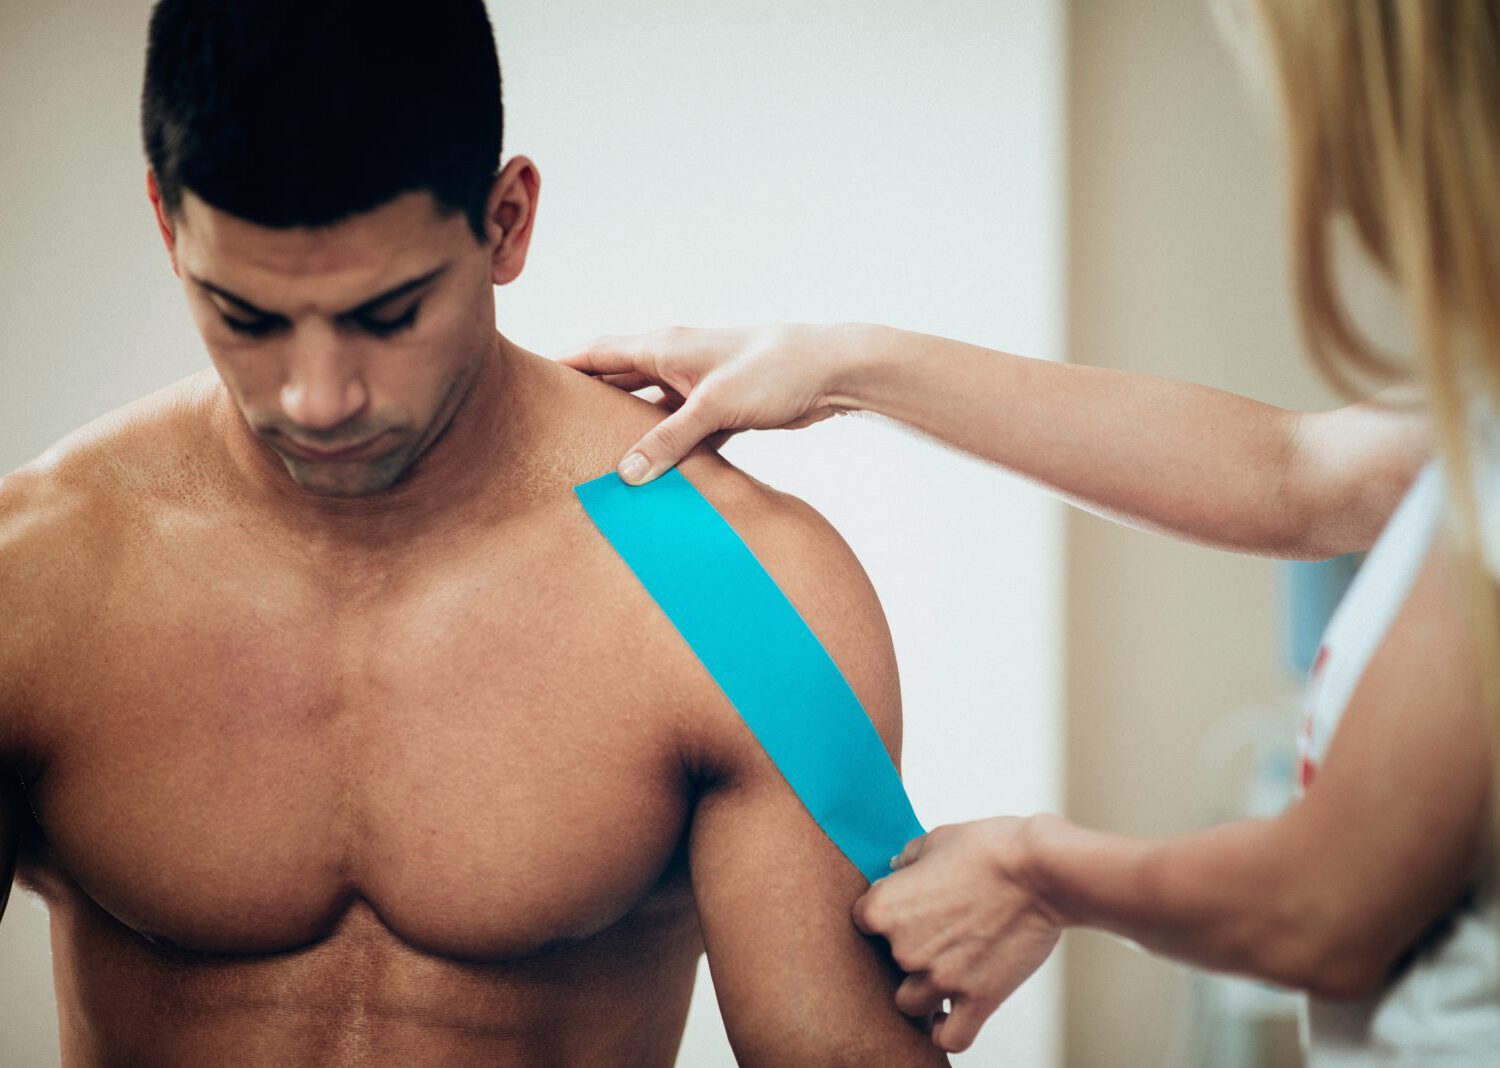 Physical therapist placing kinesio tape, placing it onto patient's shoulder